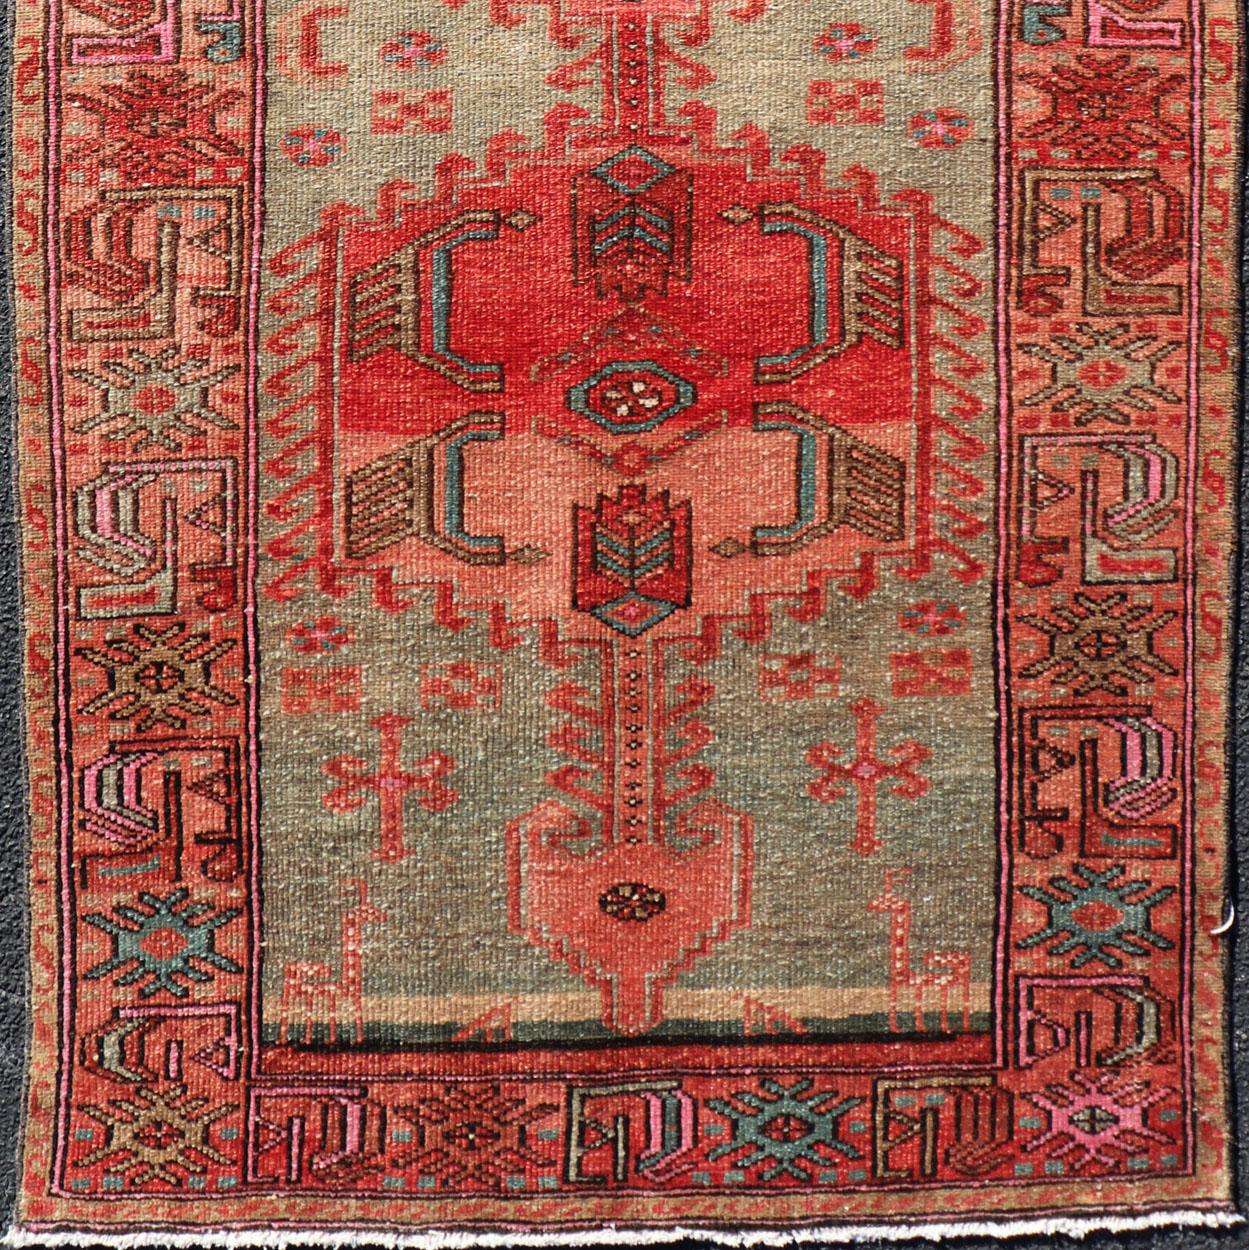 Measures: 3'1 x 6'4 
Antique Persian Hamadan Rug with Colorful Geometric Medallion With Light Green. Keivan Woven Arts / rug EN-14482, country of origin / type: Iran / Hamadan, circa 1930.
This antique Persian Hamadan rug (circa early 20th century)